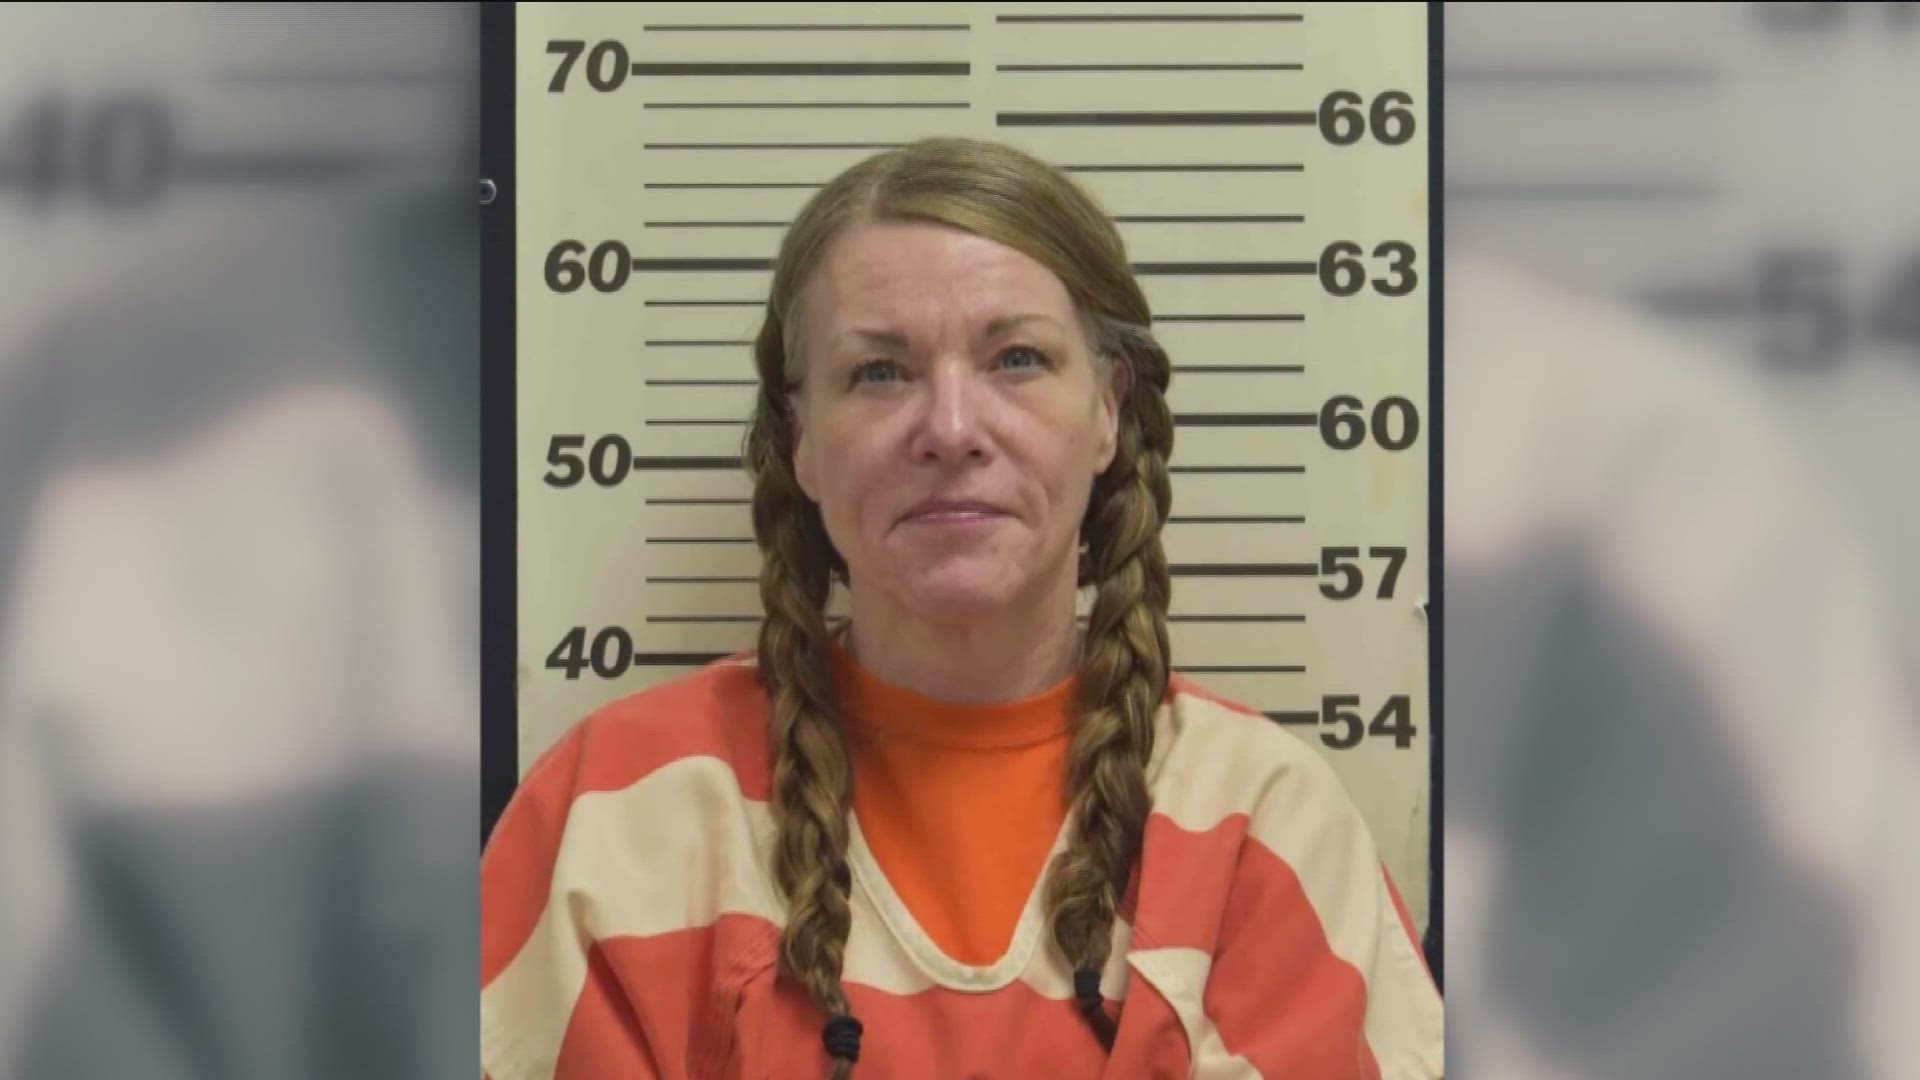 Vallow is scheduled to be sentenced for murder, conspiracy and grand theft on July 31. Friday marks three years since the remains of two of her children were found.